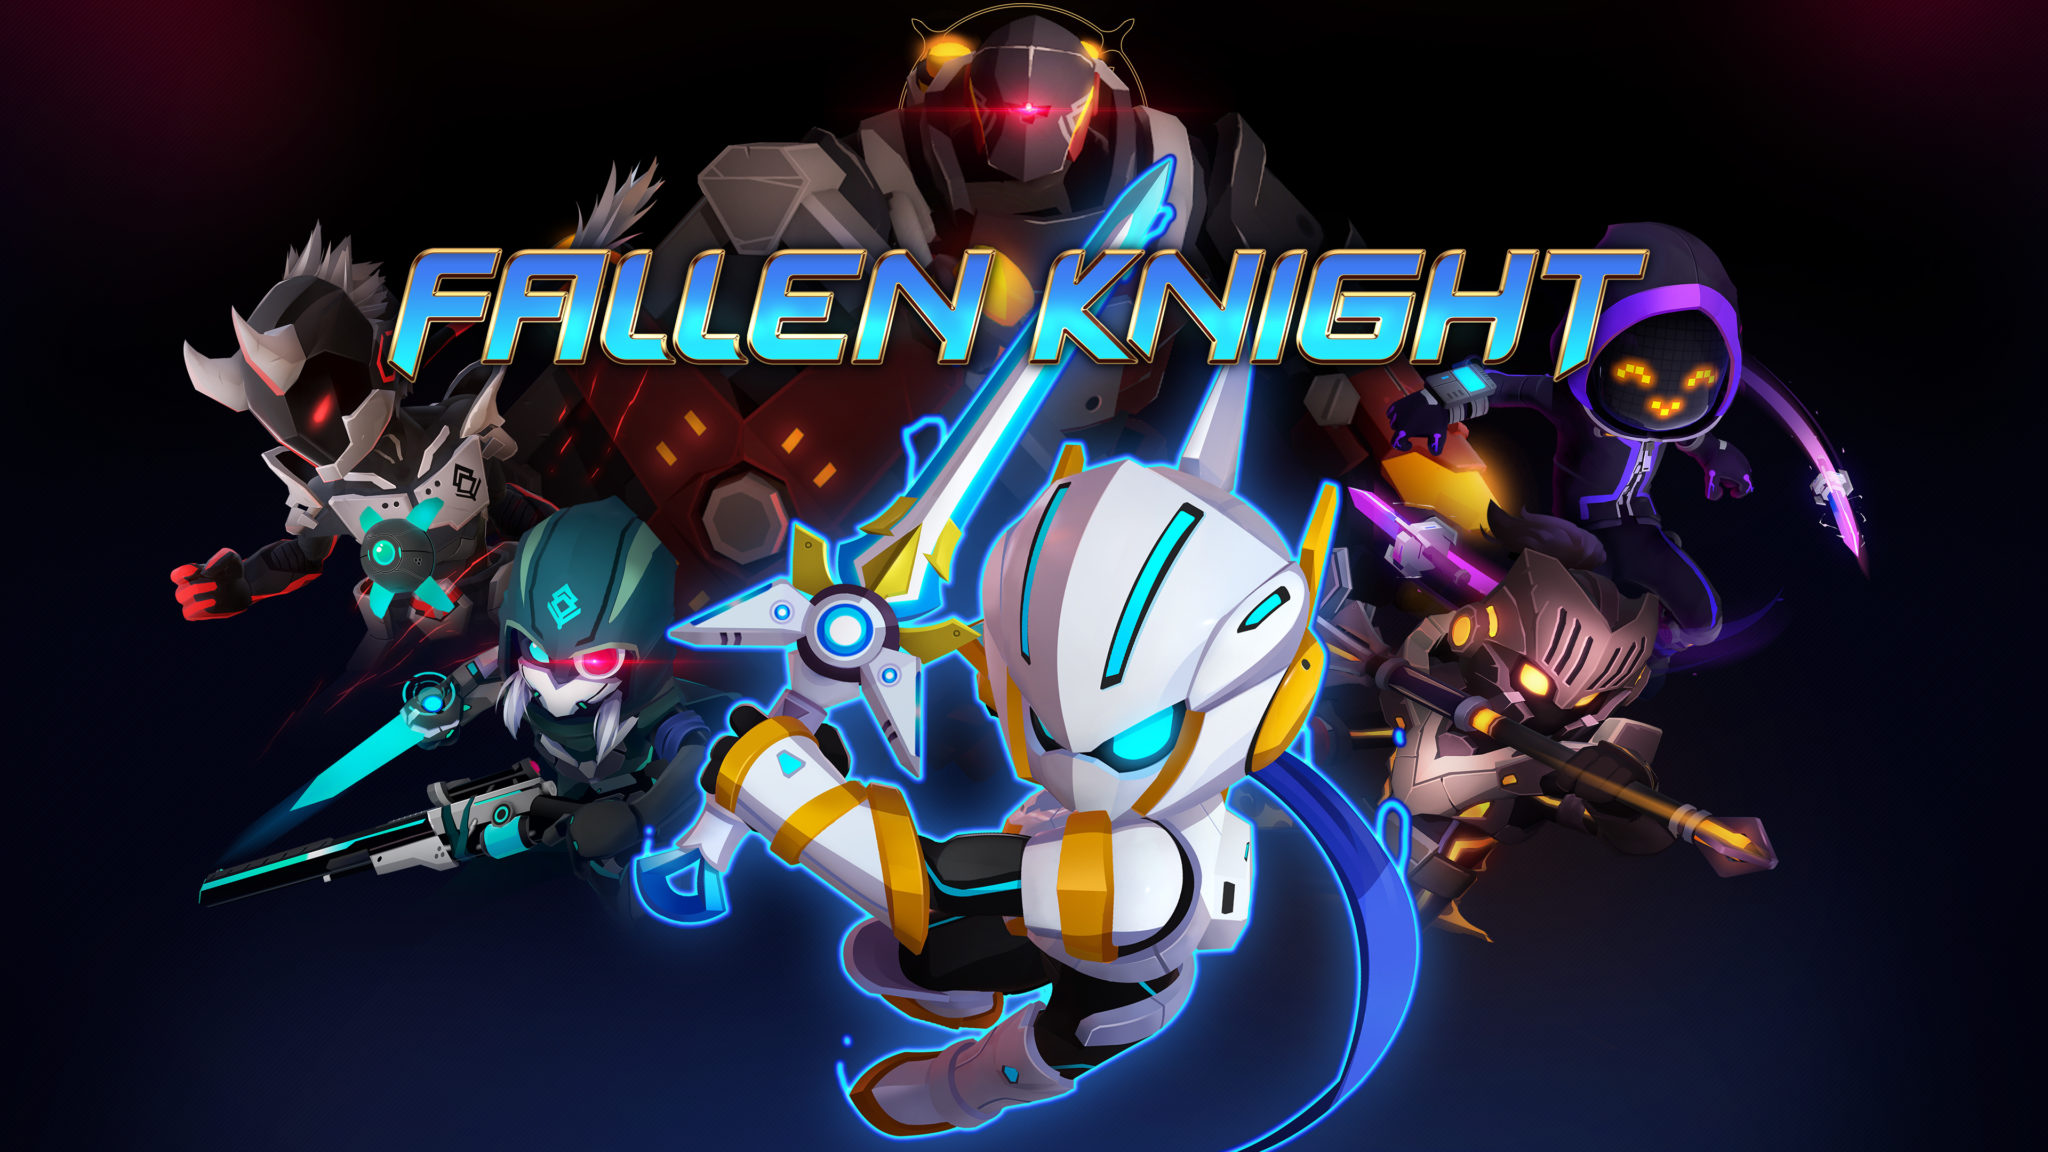 Fallen Knight' Launches on PlayStation Xbox One, and PC